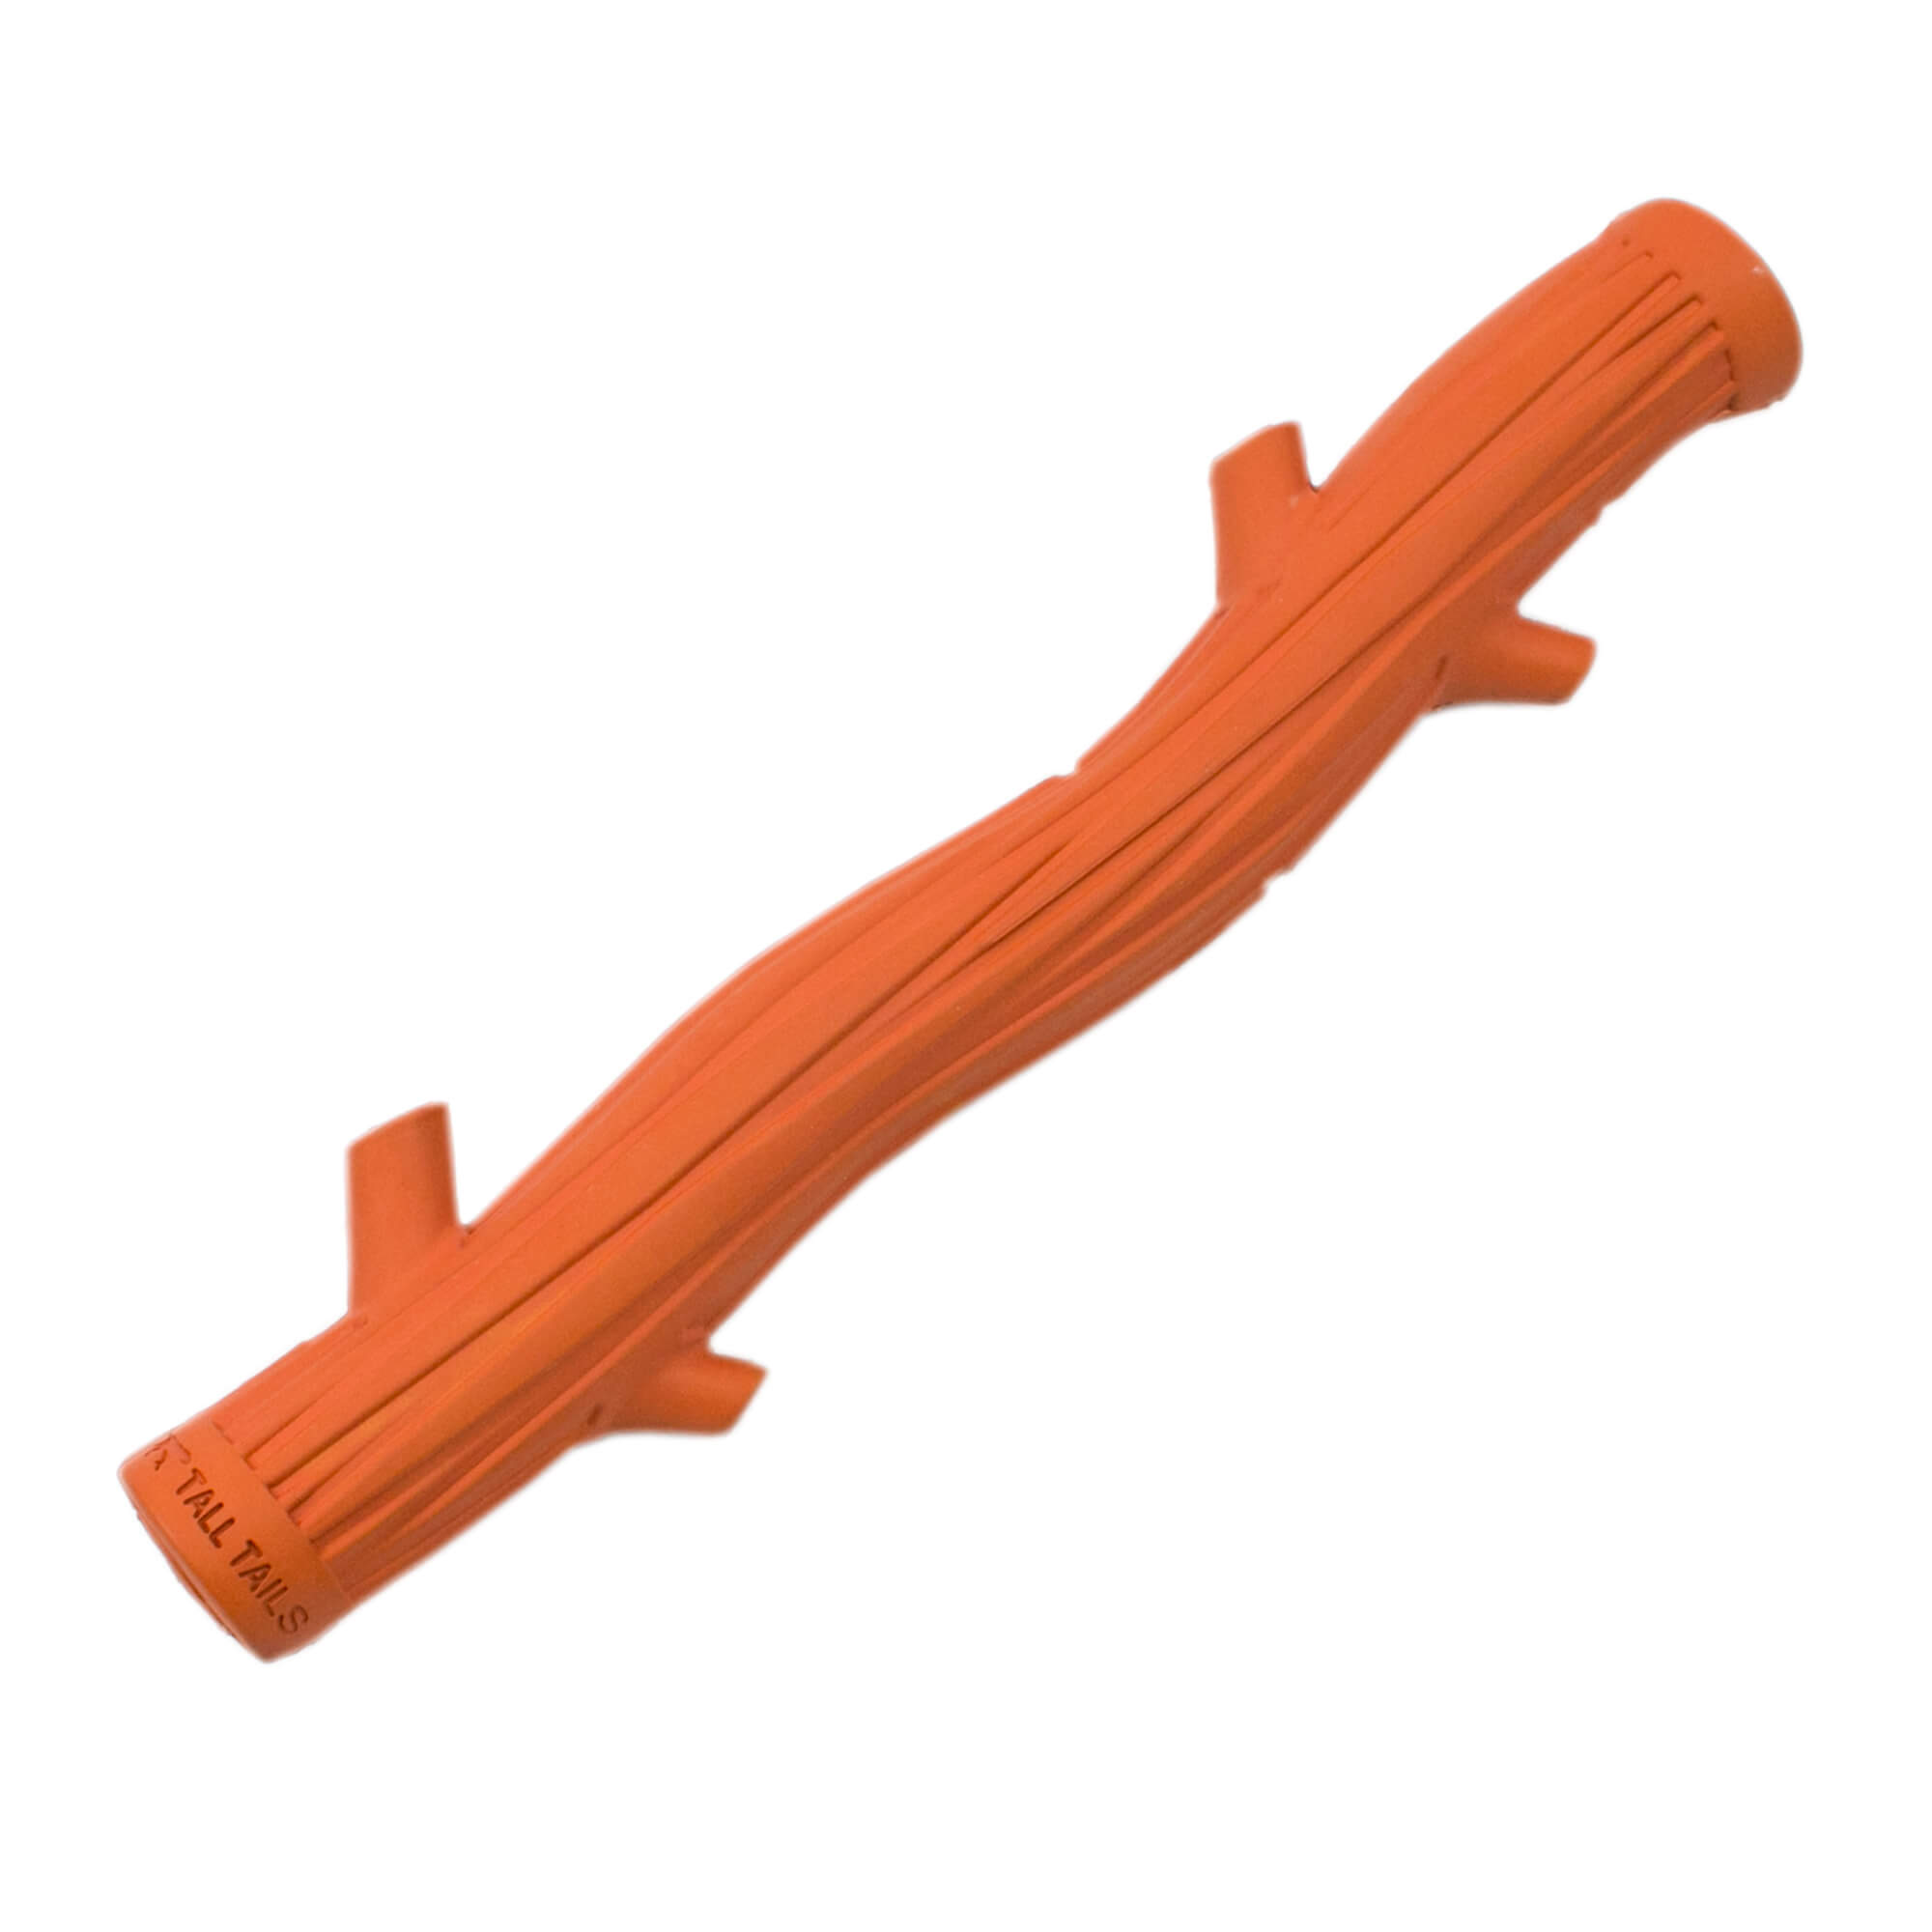 Tall Tails orange rubber stick dog toy